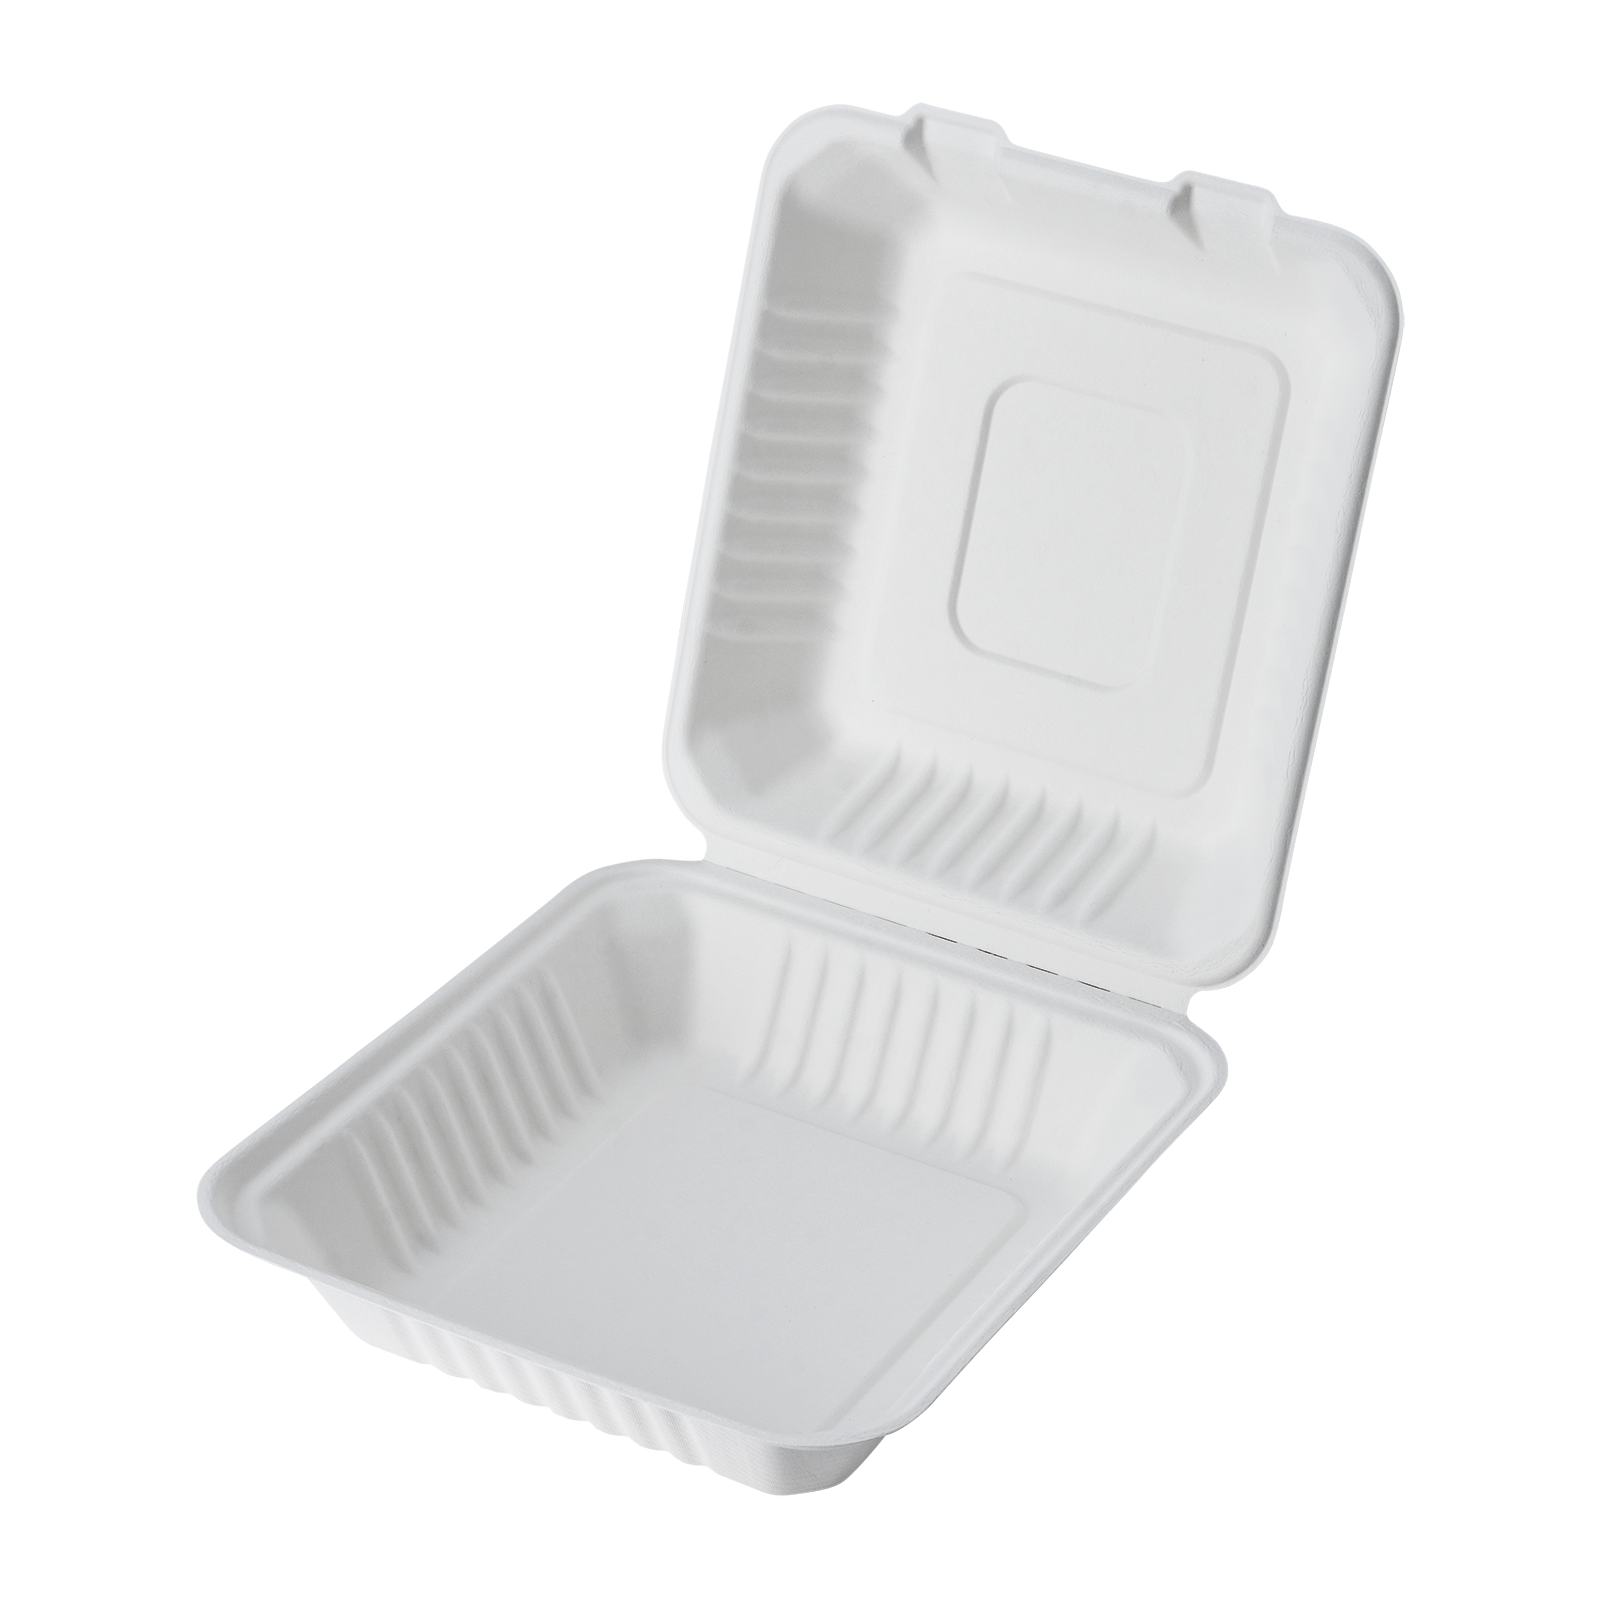 Sauce Plastic Containers With Hinged Lid Natural 70ml - Packware